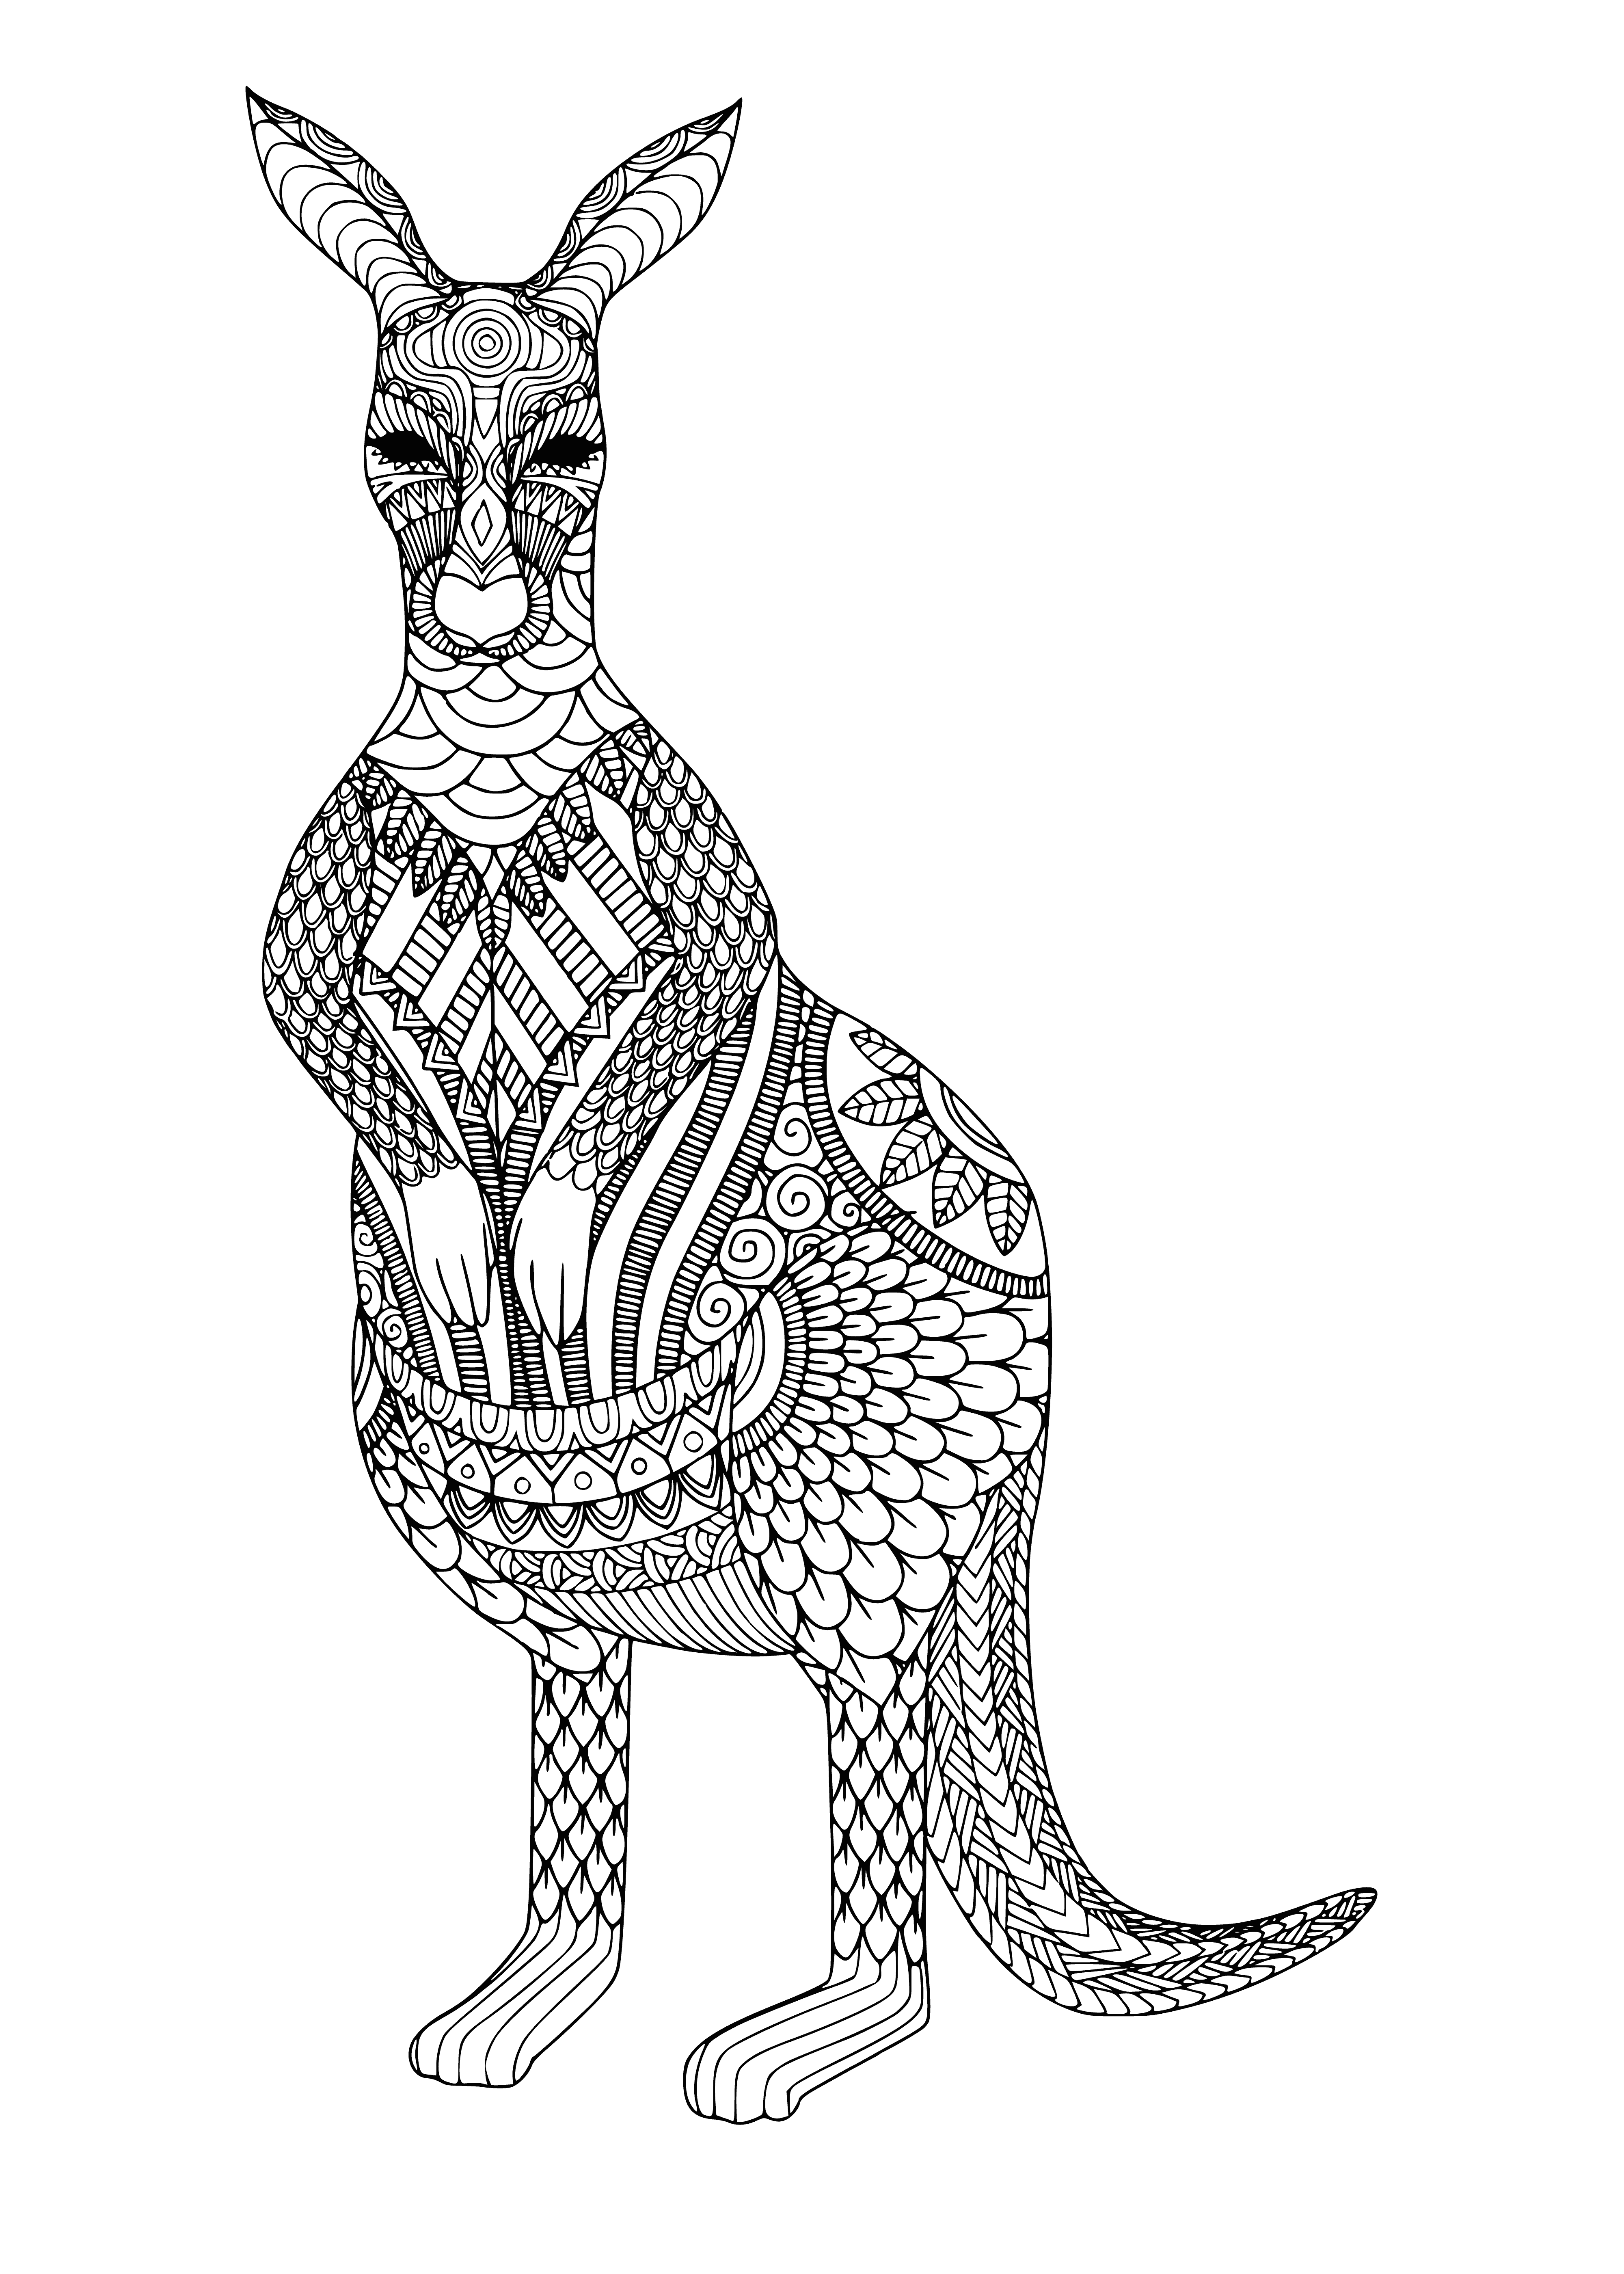 coloring page: Coloring page of standing kangaroo in brown and white fur, with trees and leaves in background.